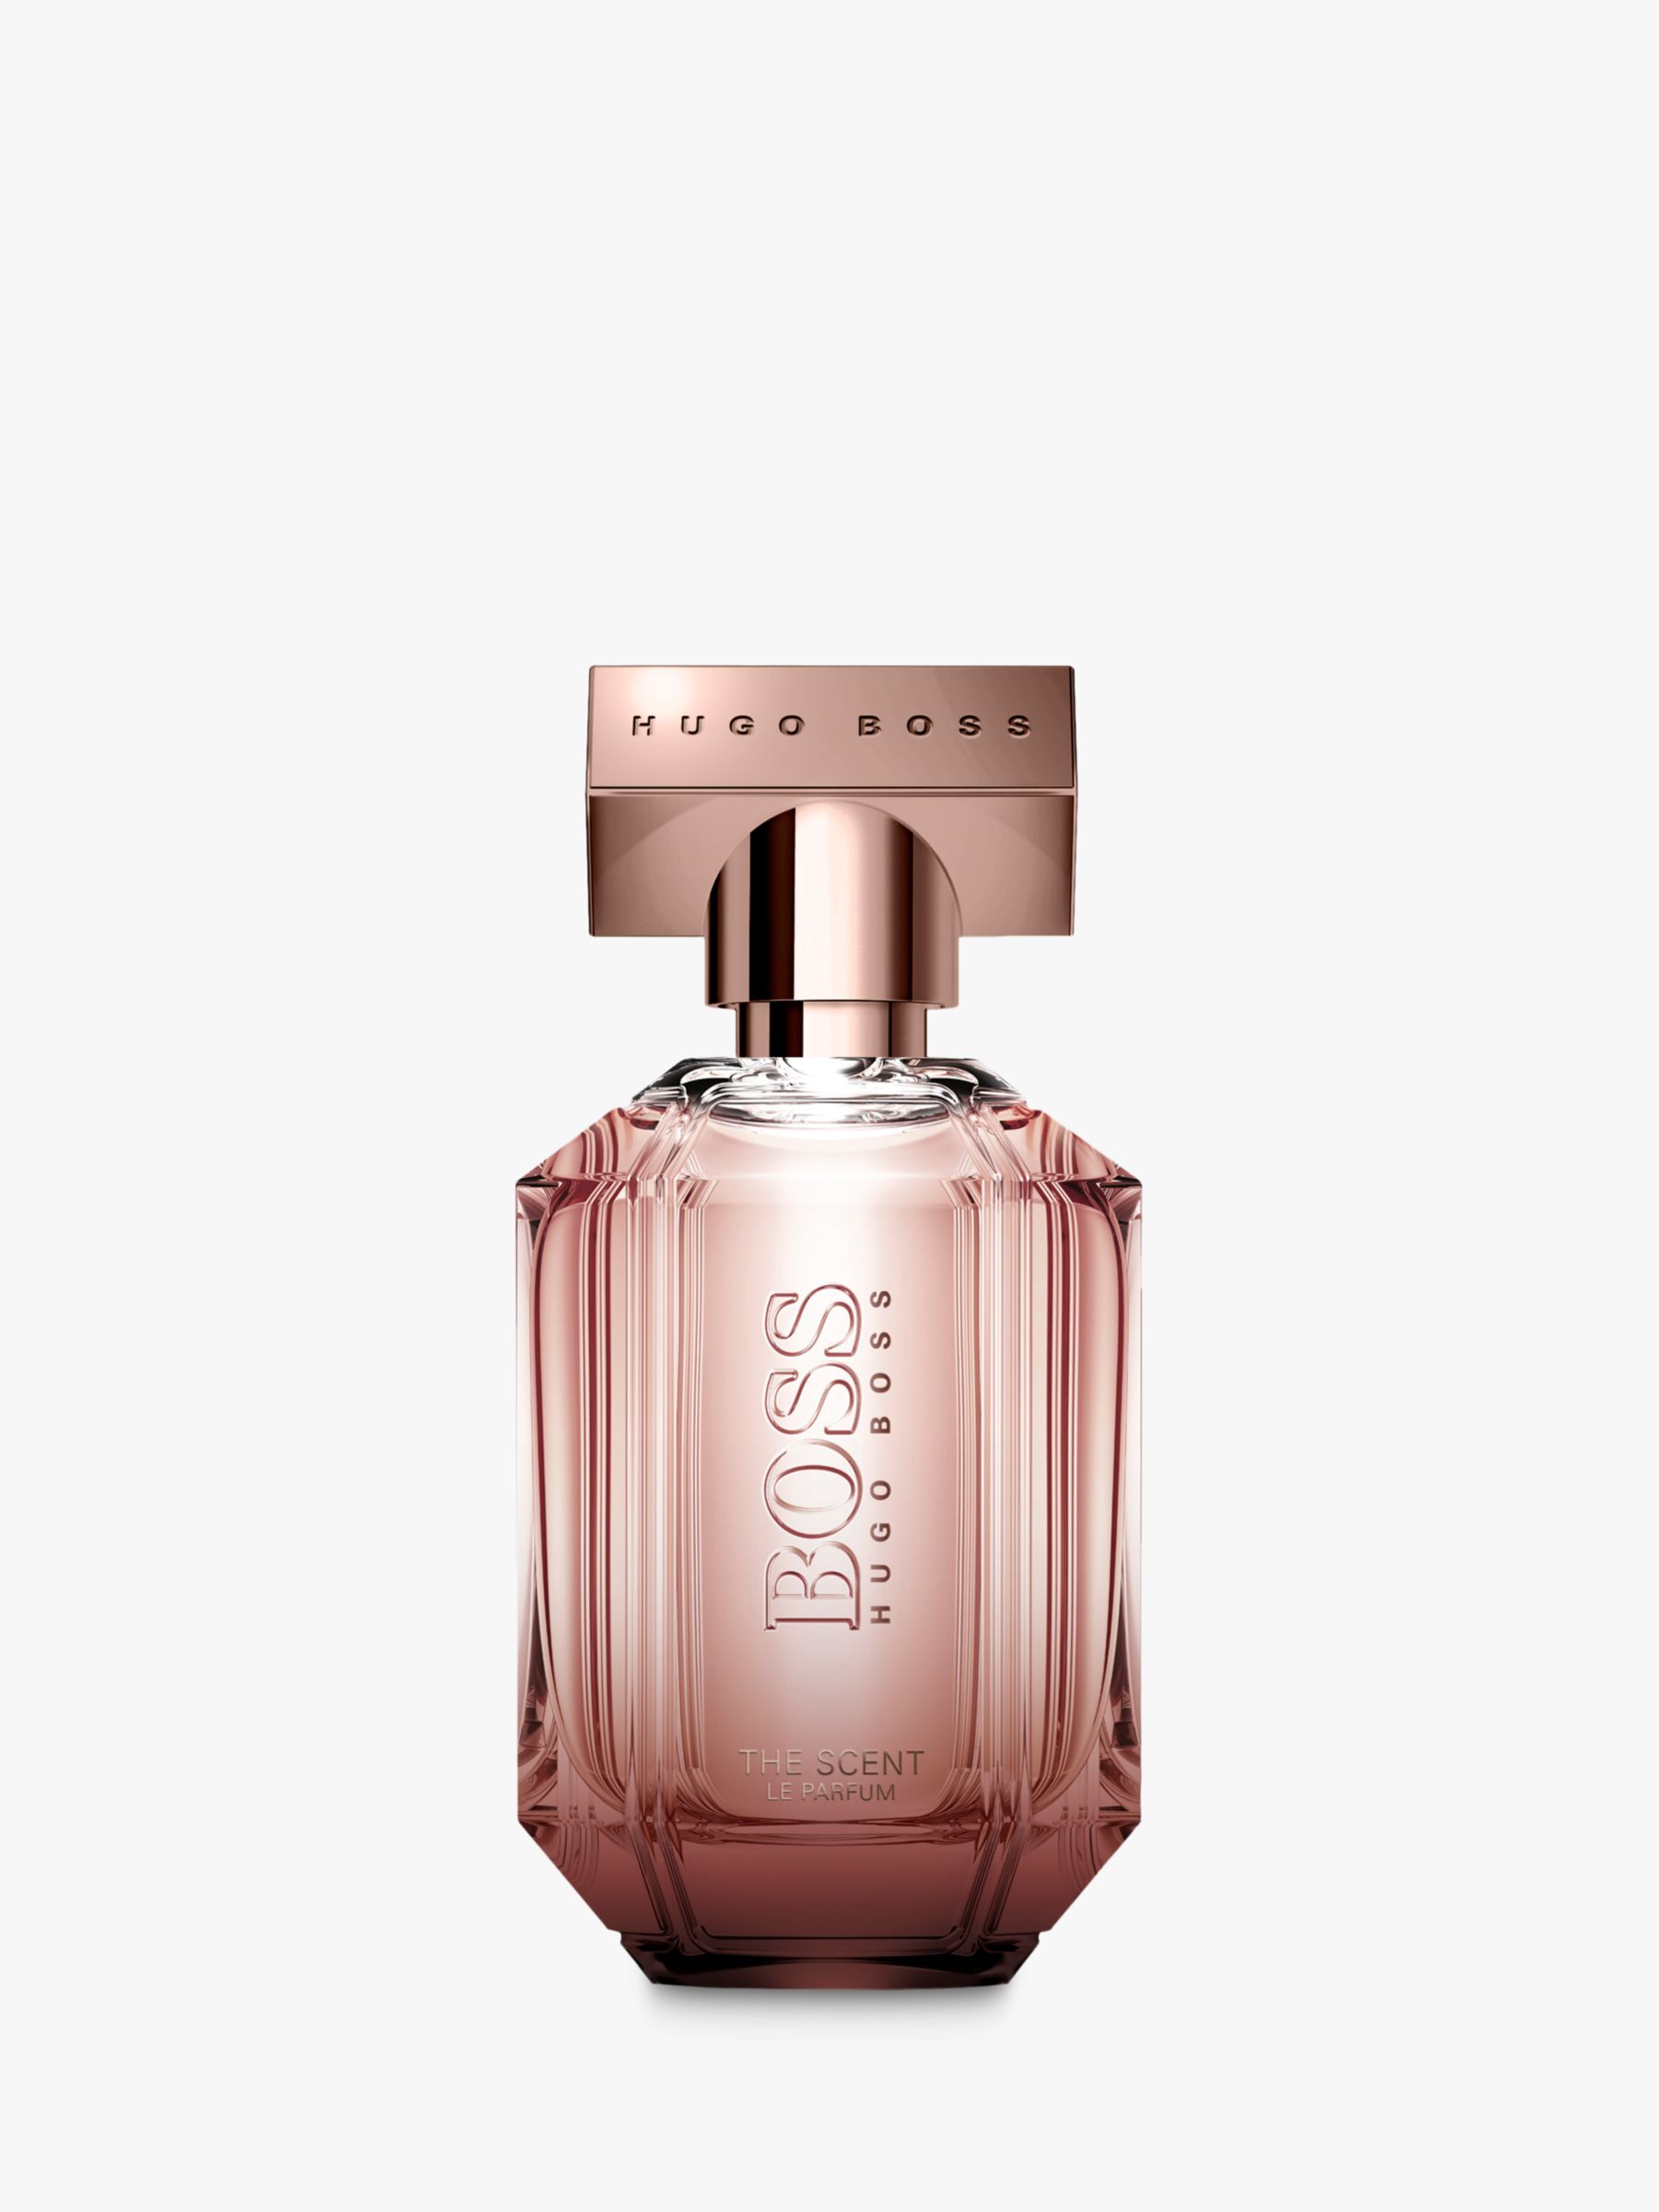 HUGO BOSS BOSS The Scent Le Parfum for Her